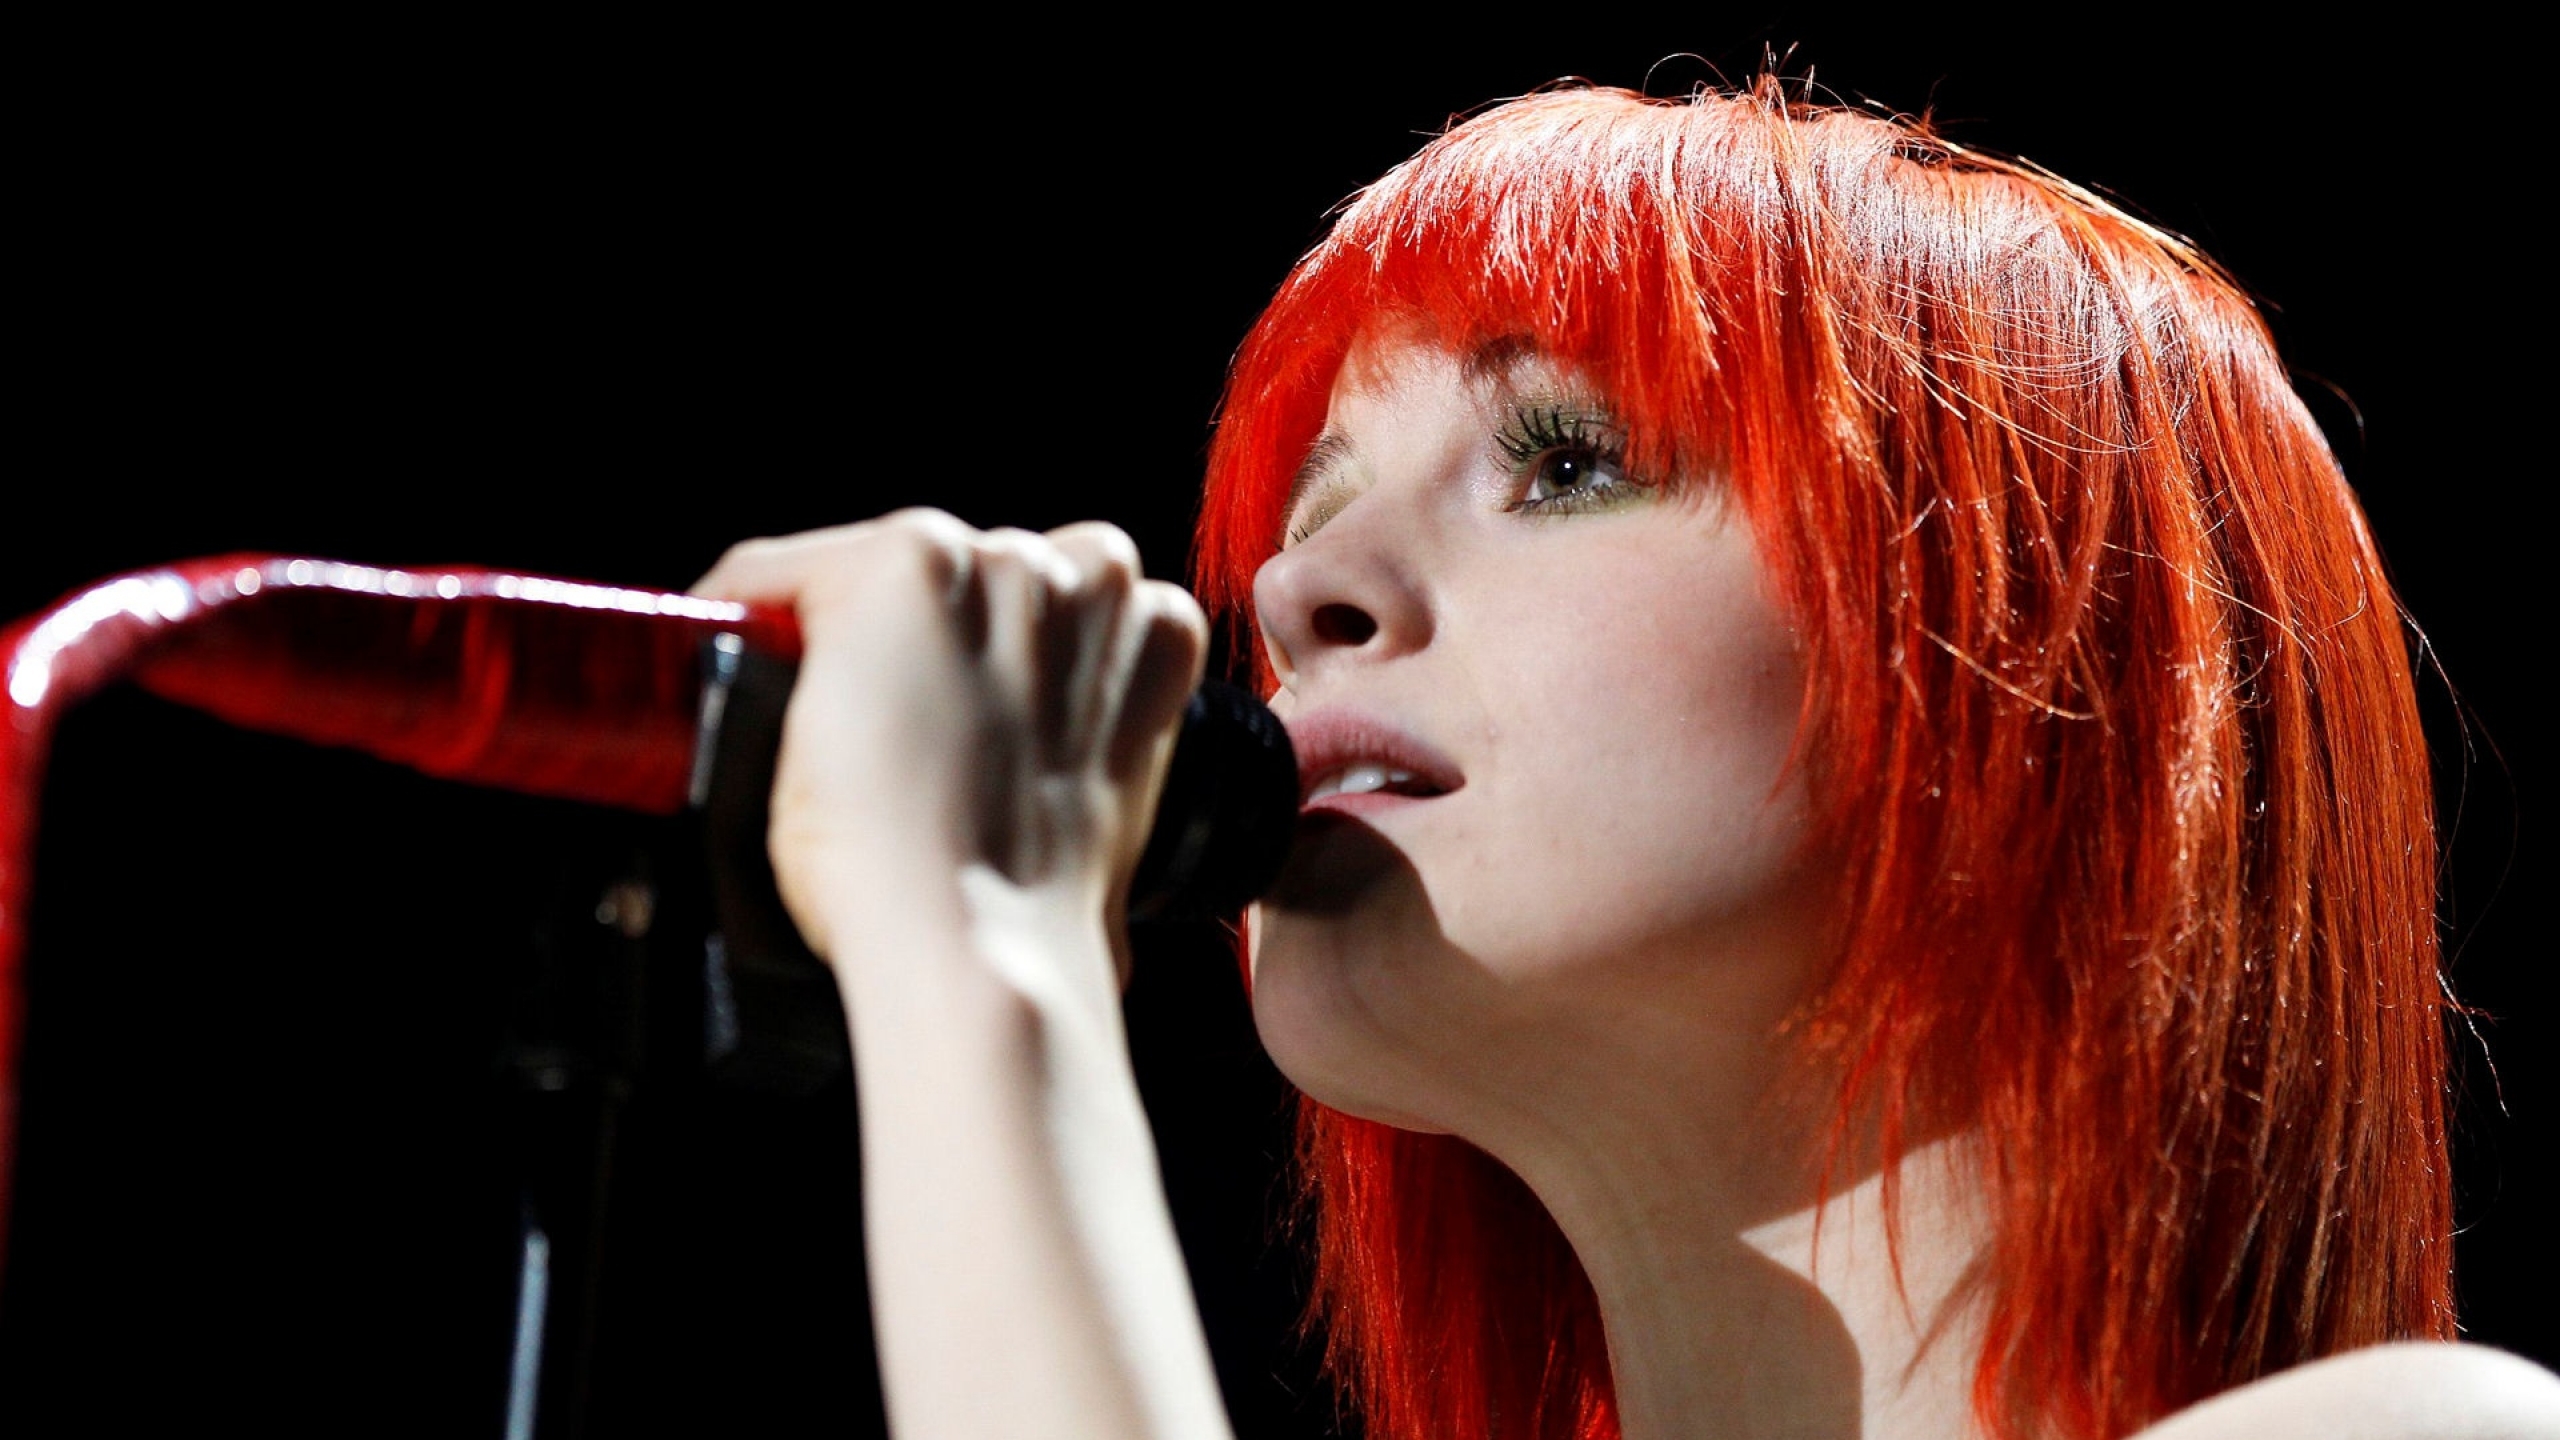 All Hayley Williams wallpapers.